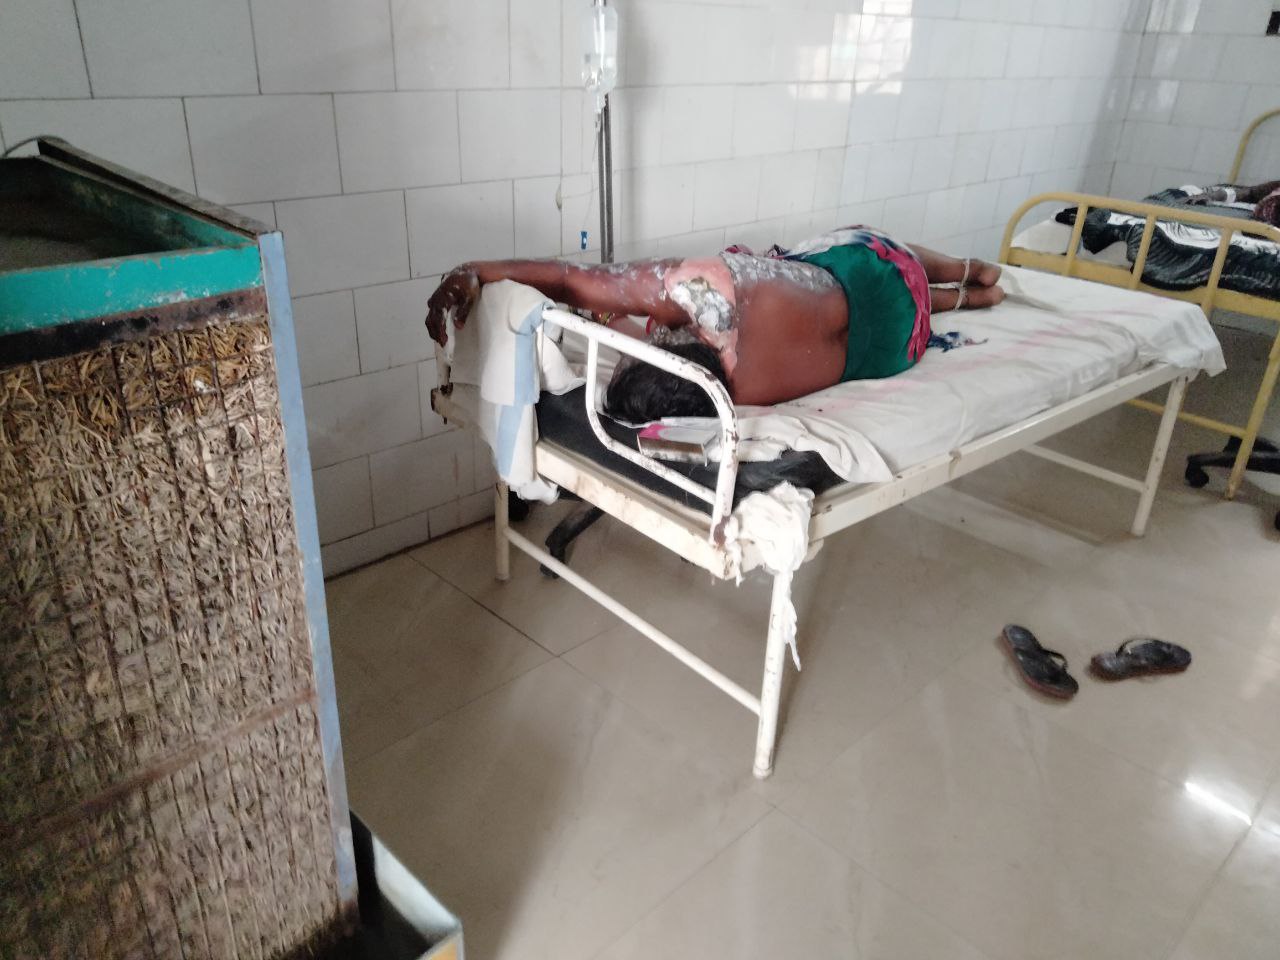 The condition of burn patients in the biggest hospital of the district